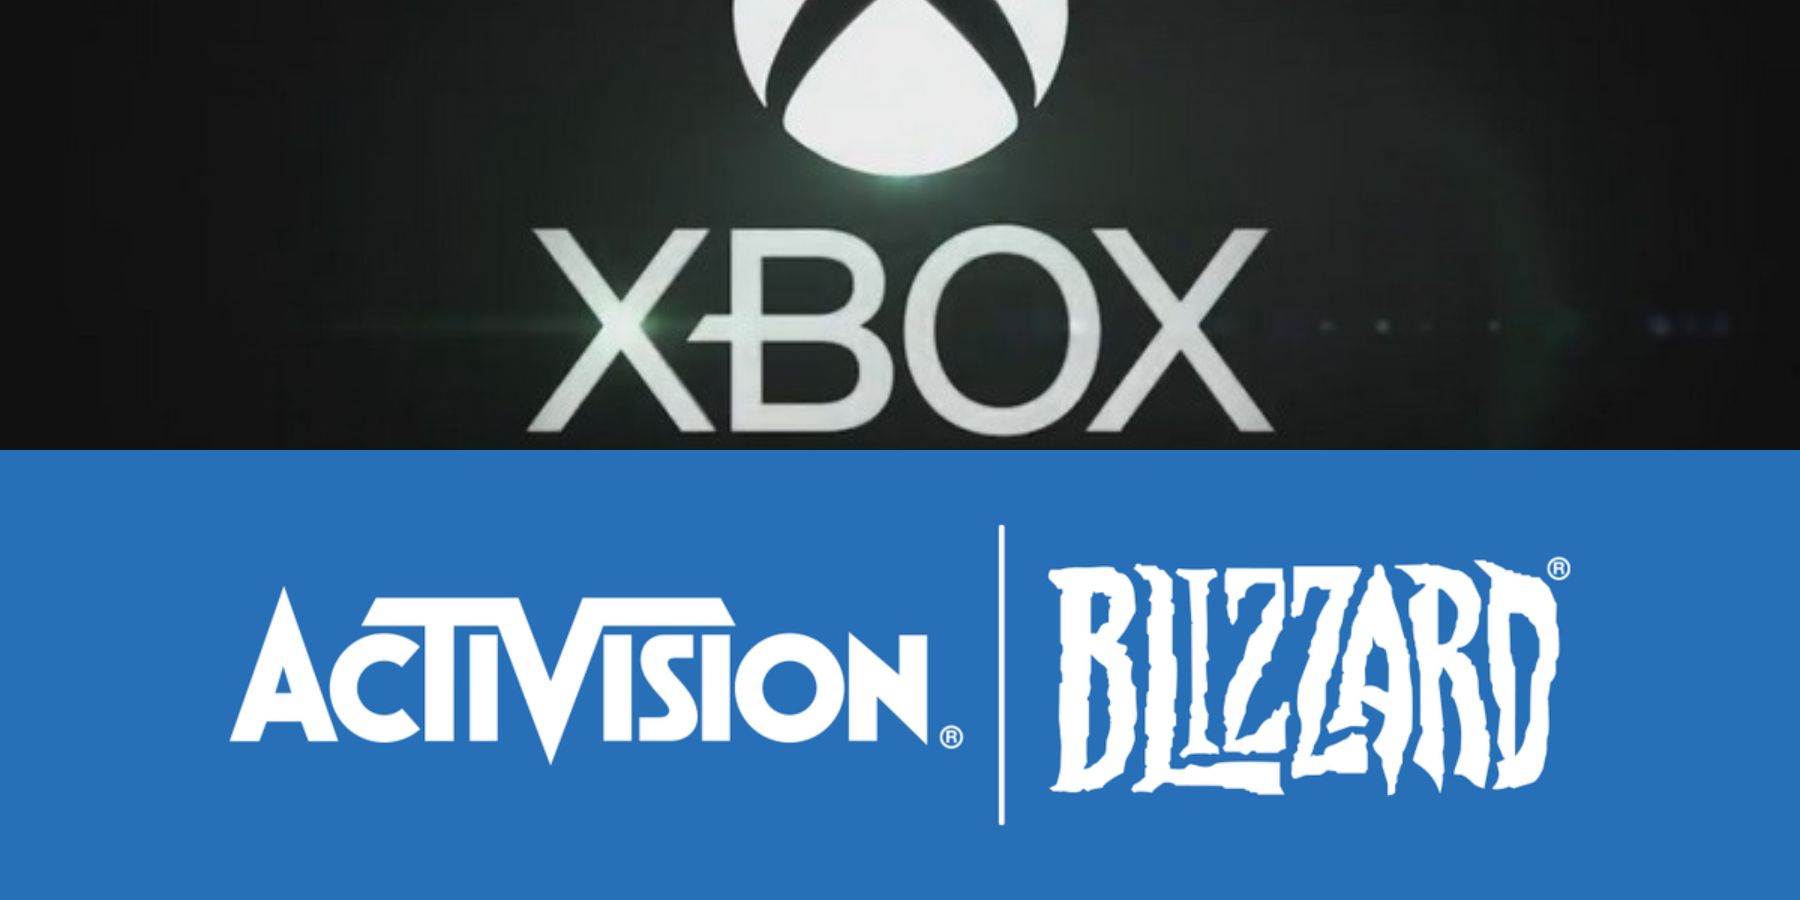 Activision Blizzard Takeover To Be 'Closely Scrutinized' According To US Senator